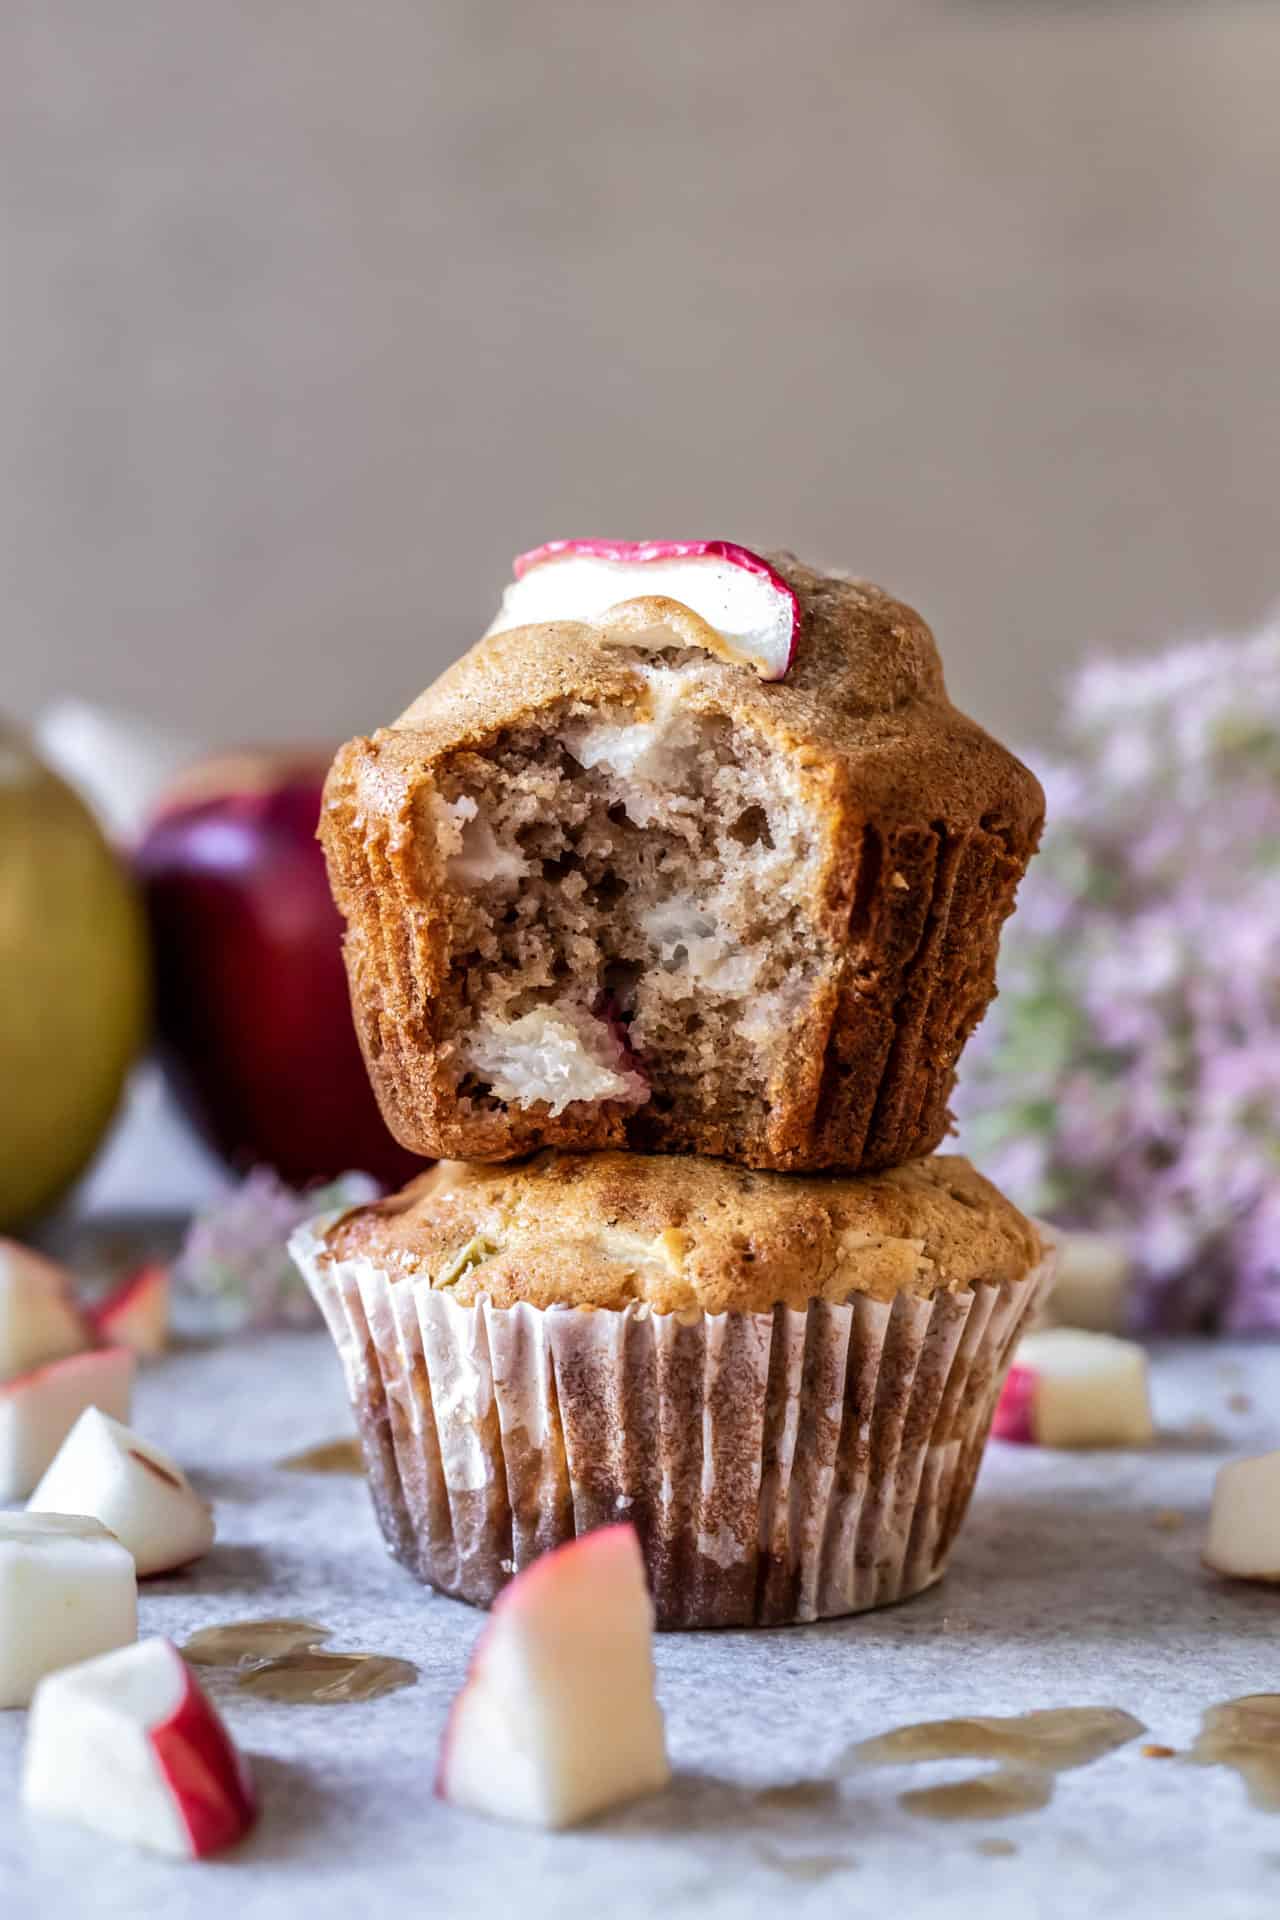 These Gluten-Free Apple Pie Muffins are tender and light, loaded with apple, perfectly sweet, hearty, satisfying and so simple to make!
